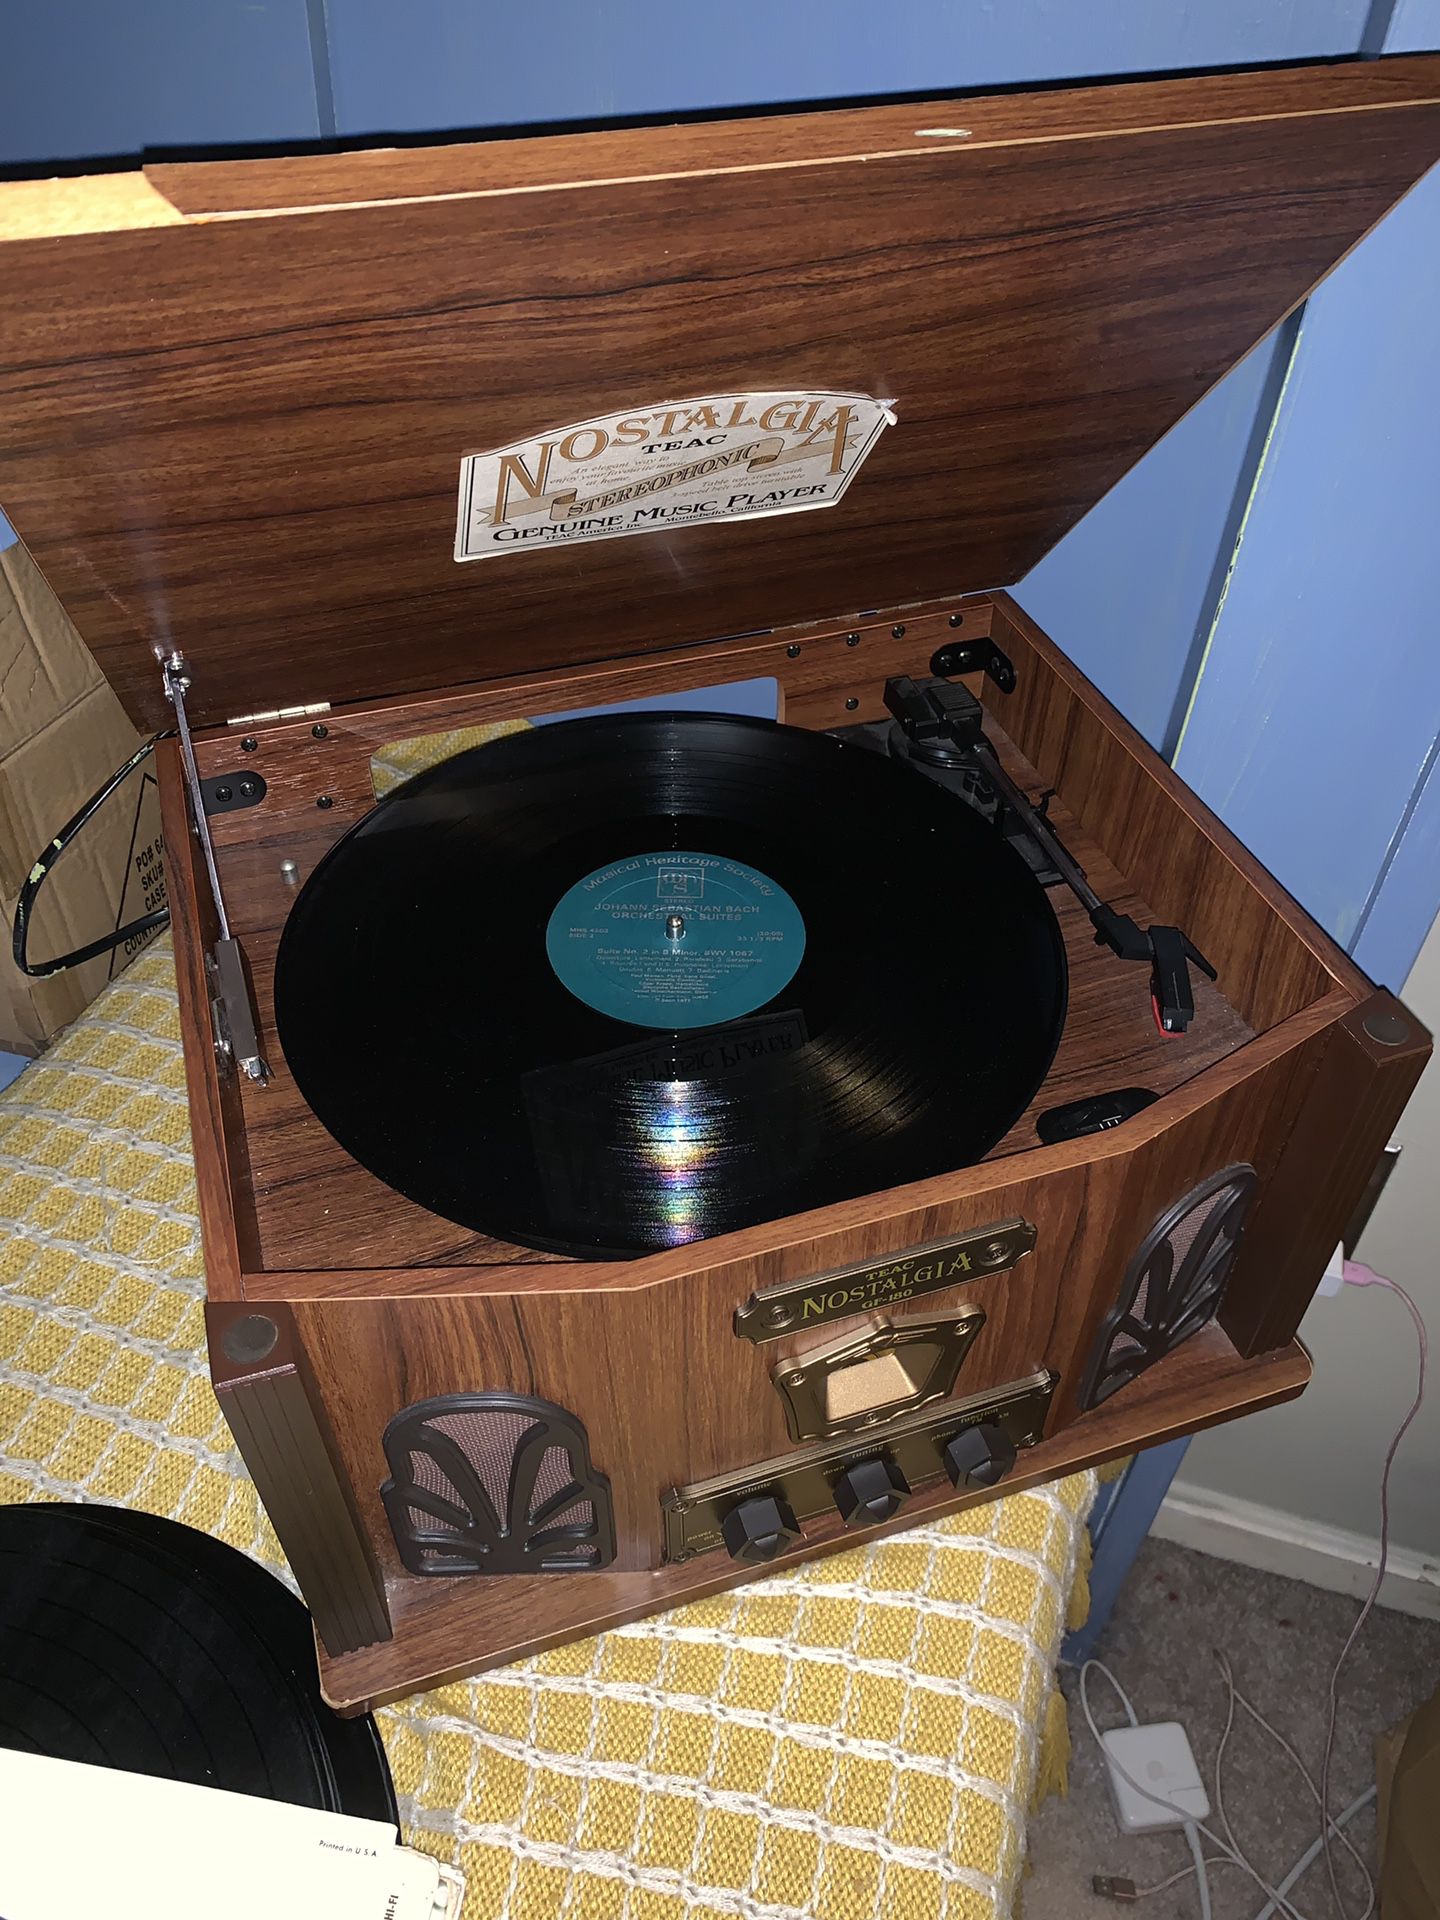 Vintage style record player